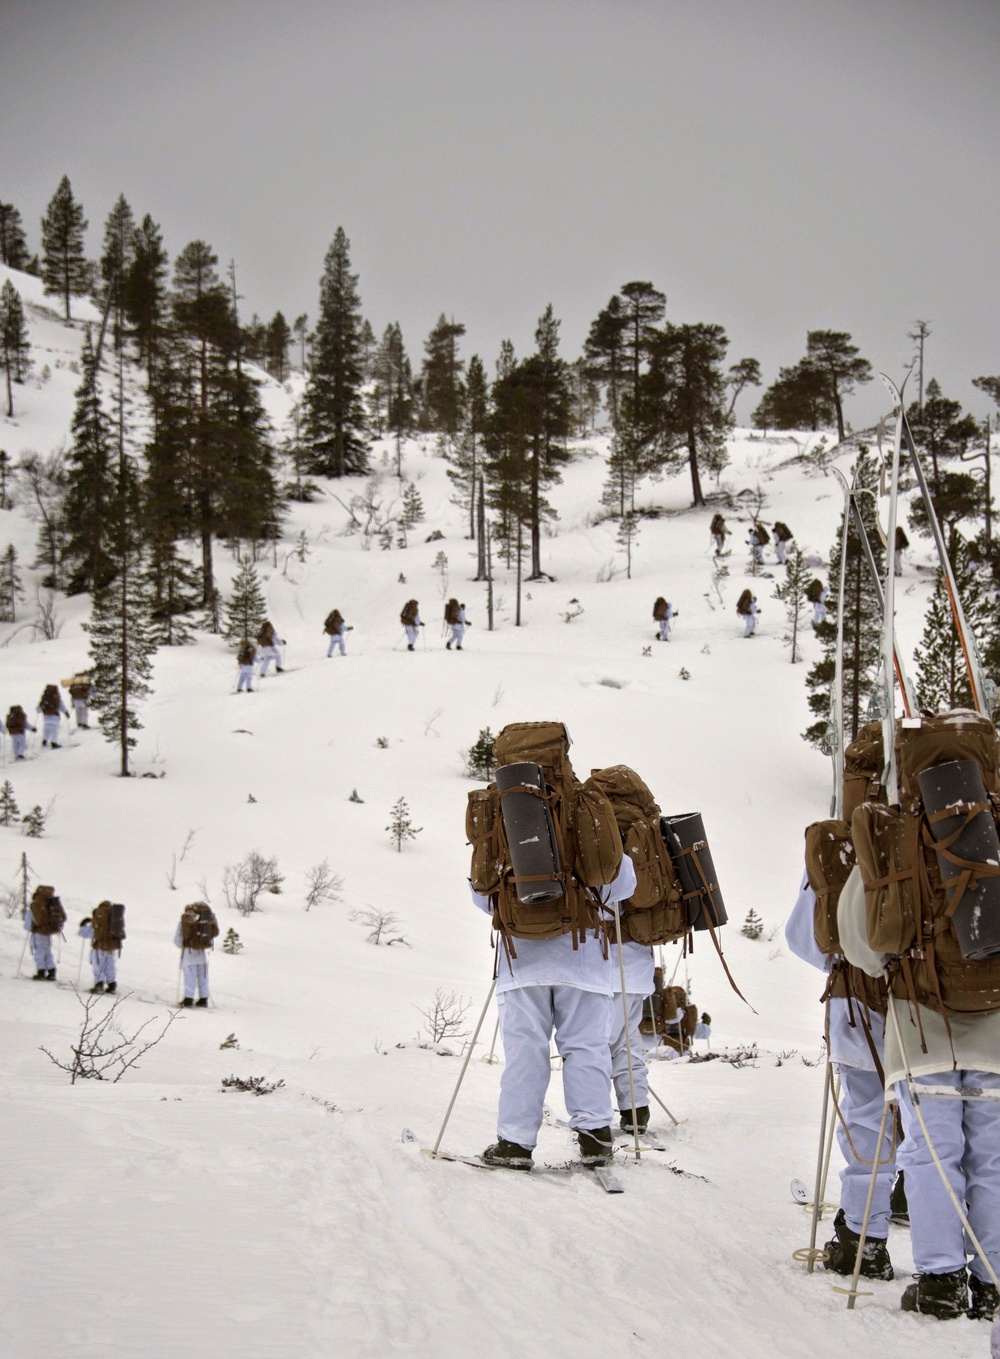 Minnesota, Norwegian service members retrace a successful mission, remember the terrible cost